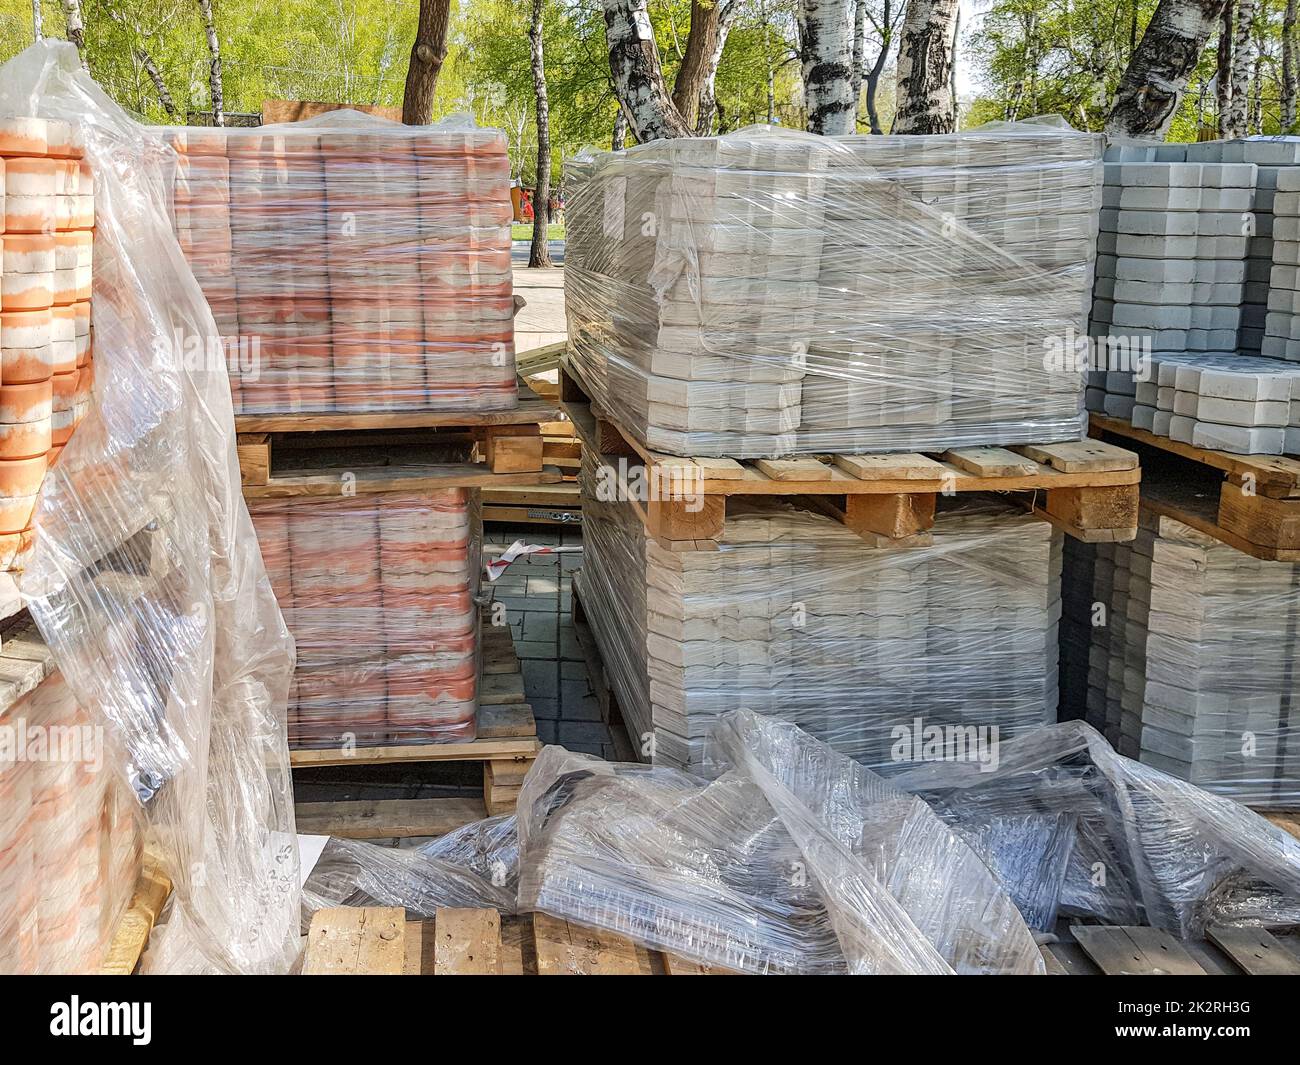 Close-up, the new paving slabs are neatly stacked on pallets. Repair of sidewalks and replacement of paving slabs. Reconstruction of urban infrastructure Stock Photo